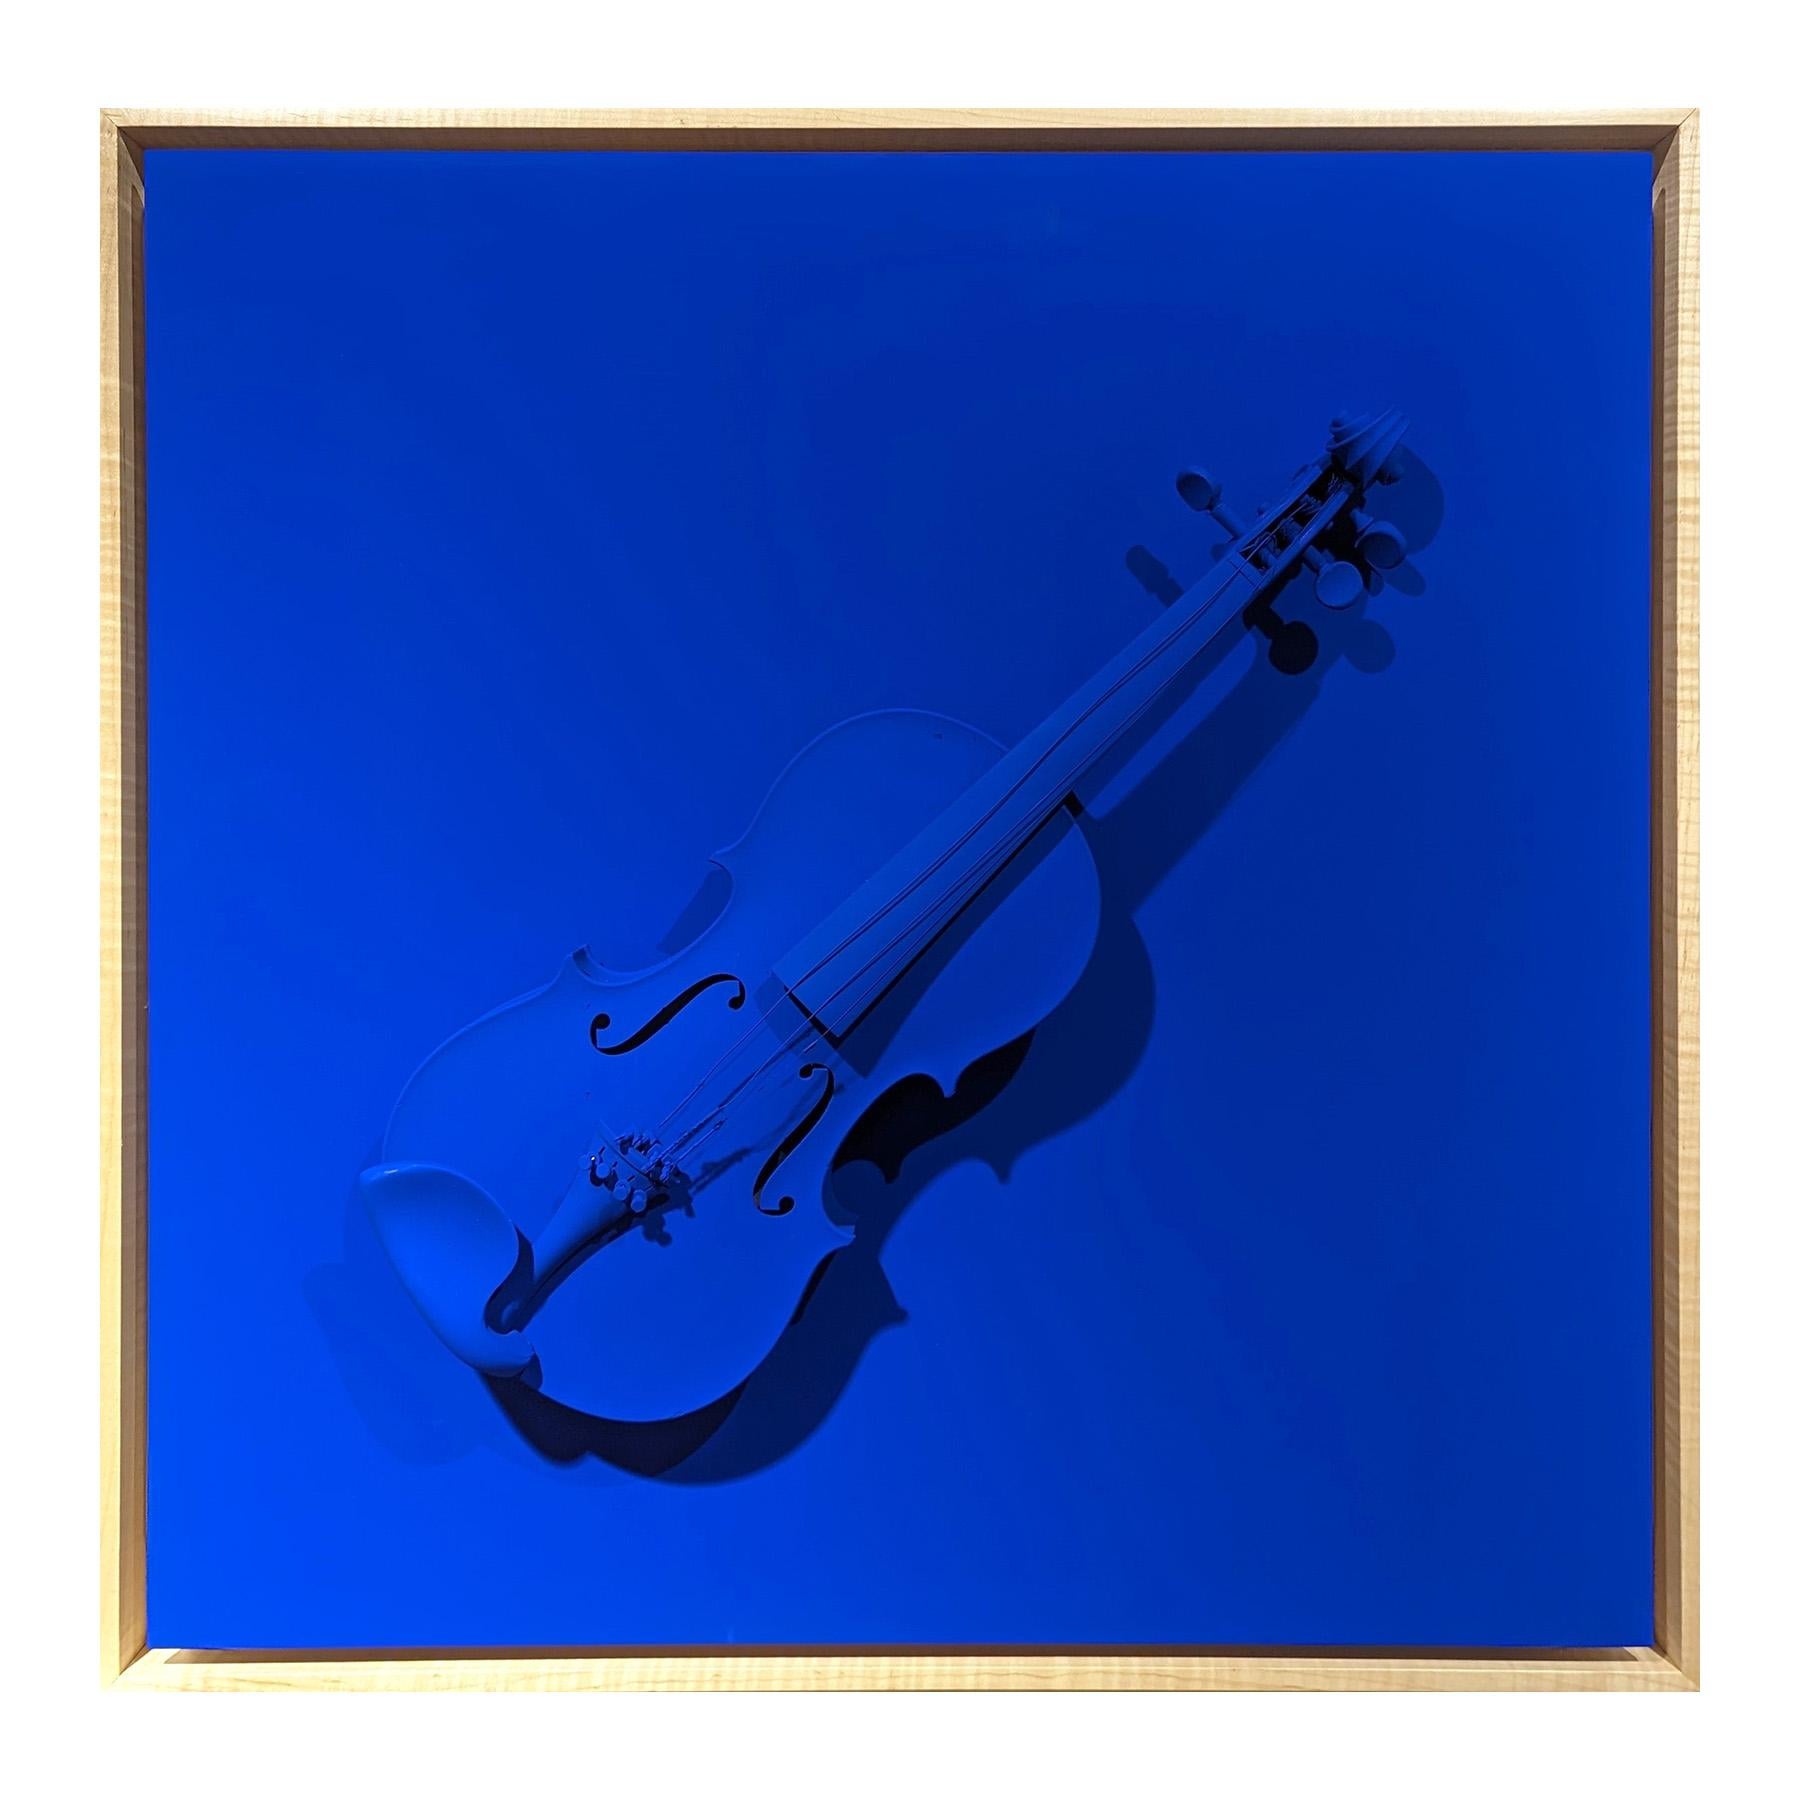 Bright blue sculptural painting by contemporary artist Paul Reeves. The work features a found violin painted blue floating against a background of the same vibrant blue color. Currently hung in a light wood floating frame.  

Dimensions Without